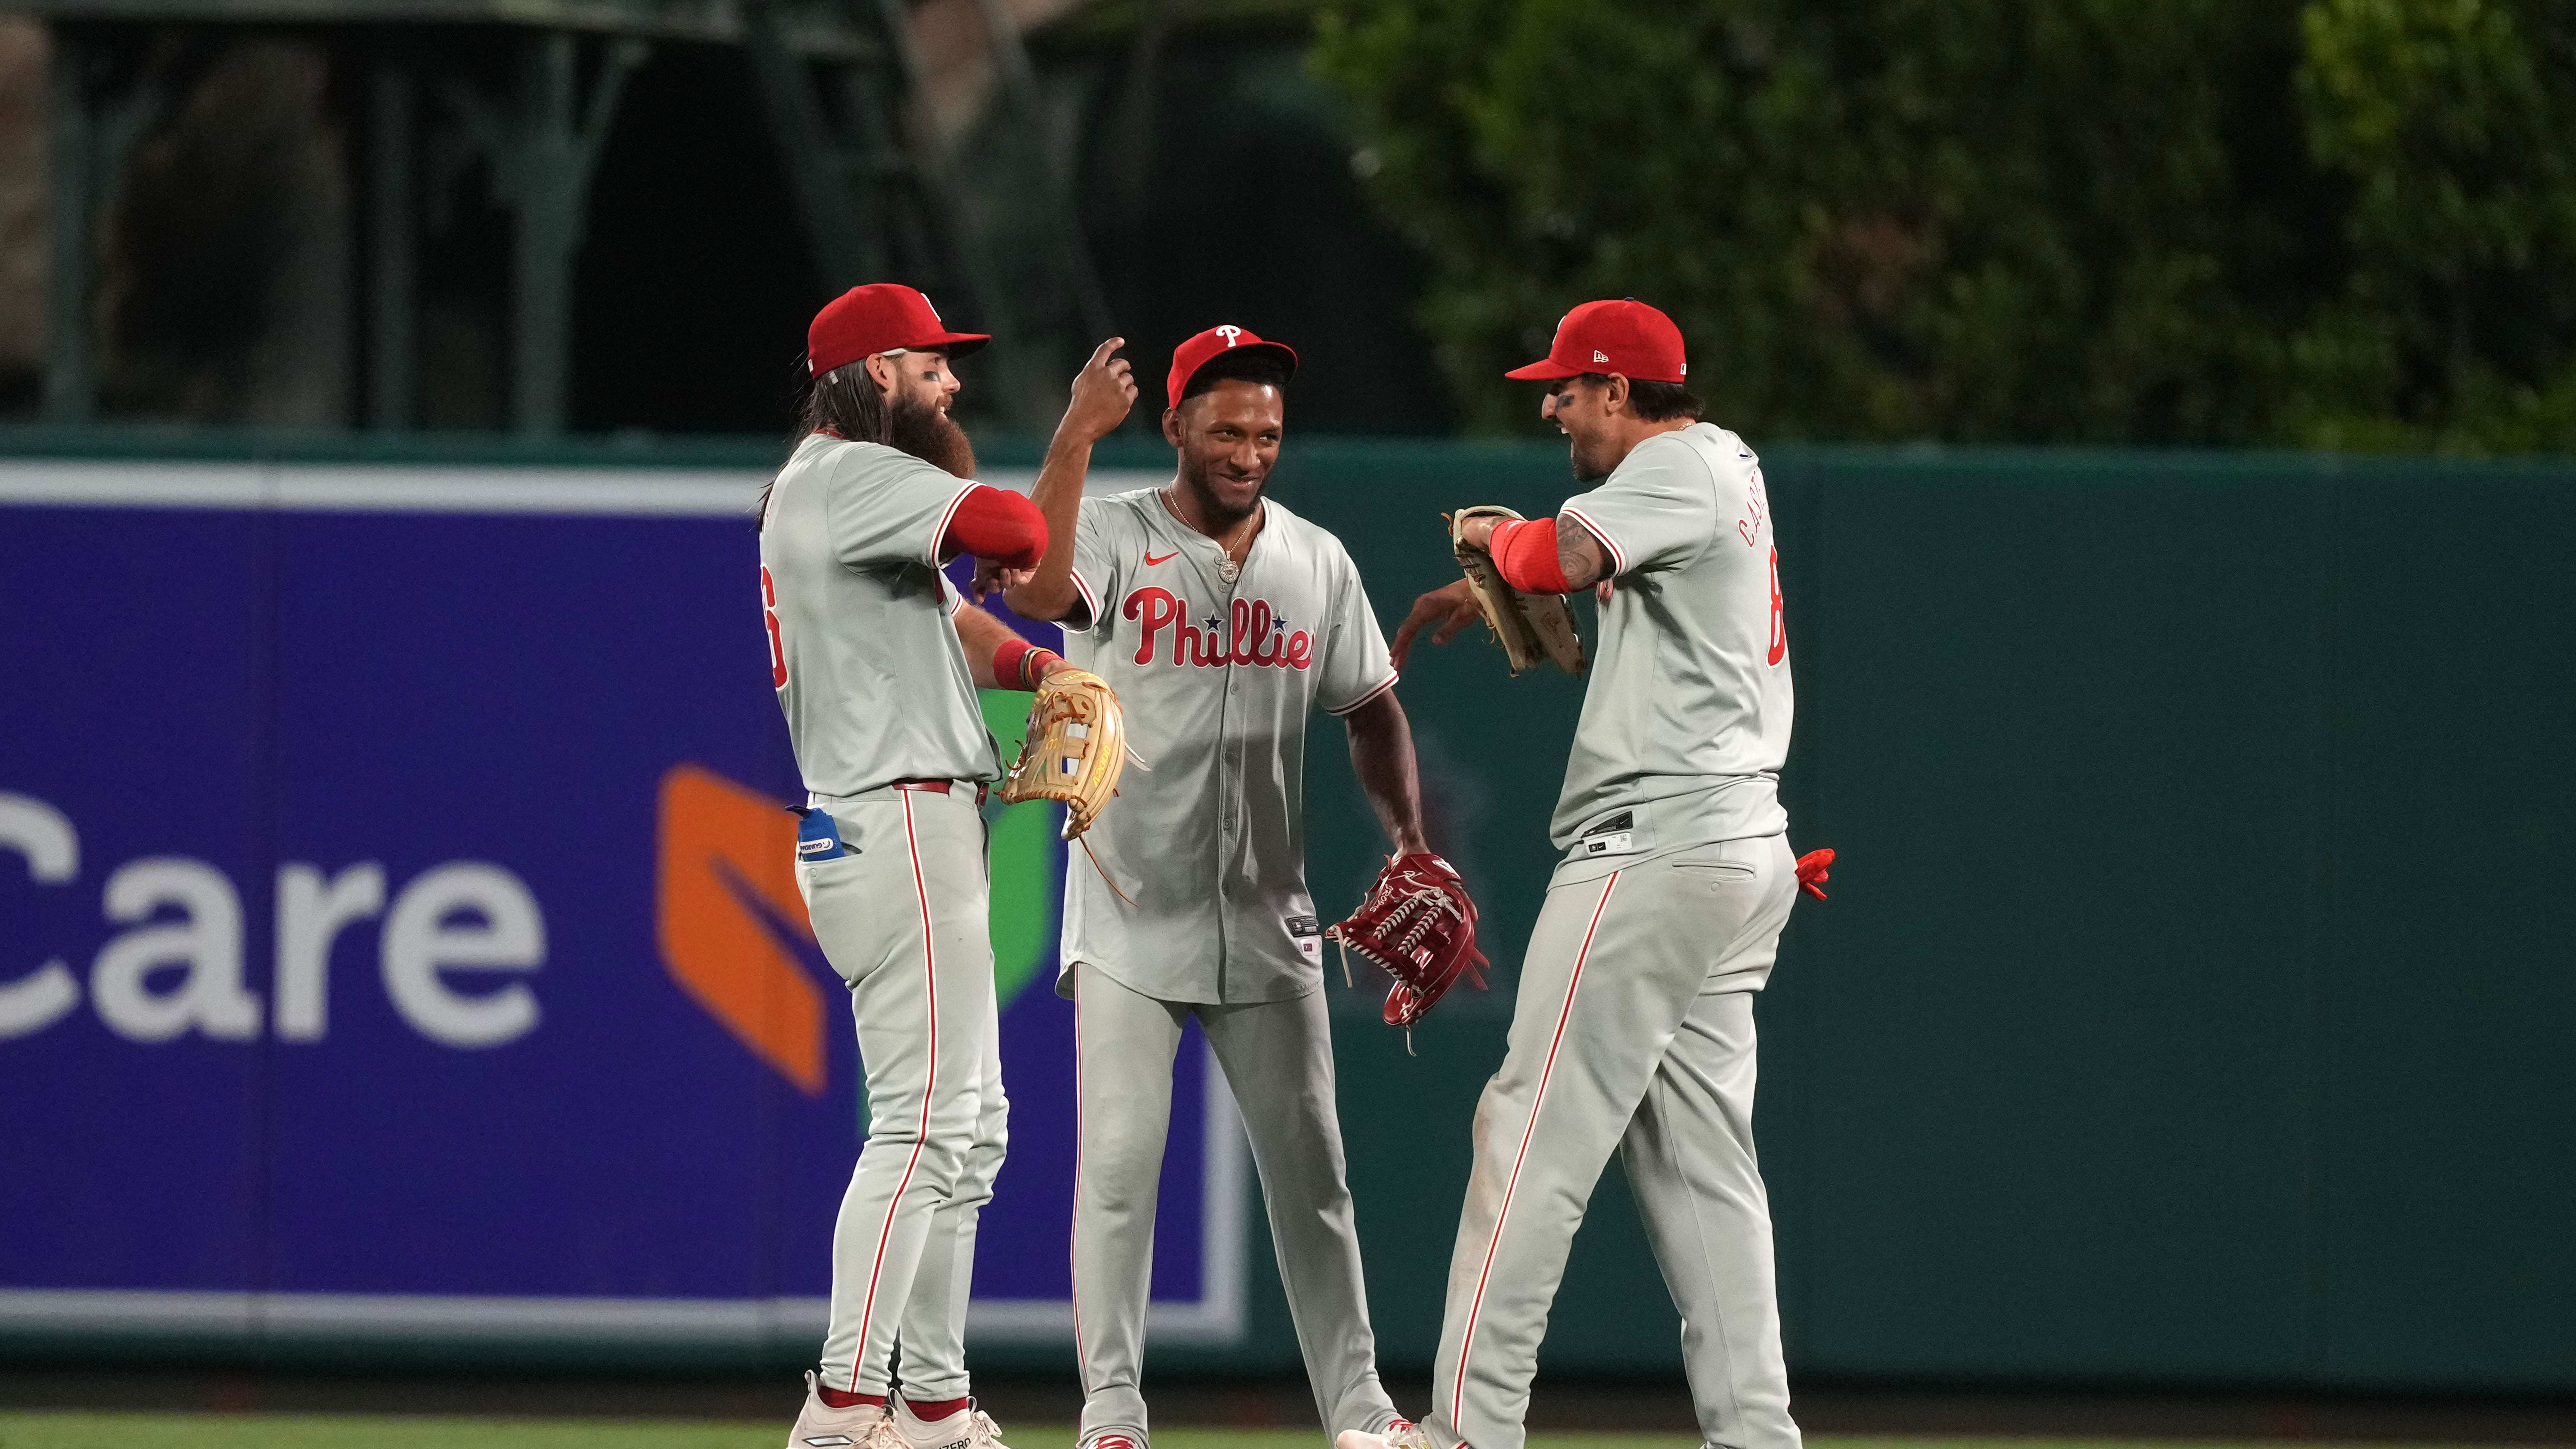 An earthquake interrupts the Angels-Phillies game at Angel Stadium